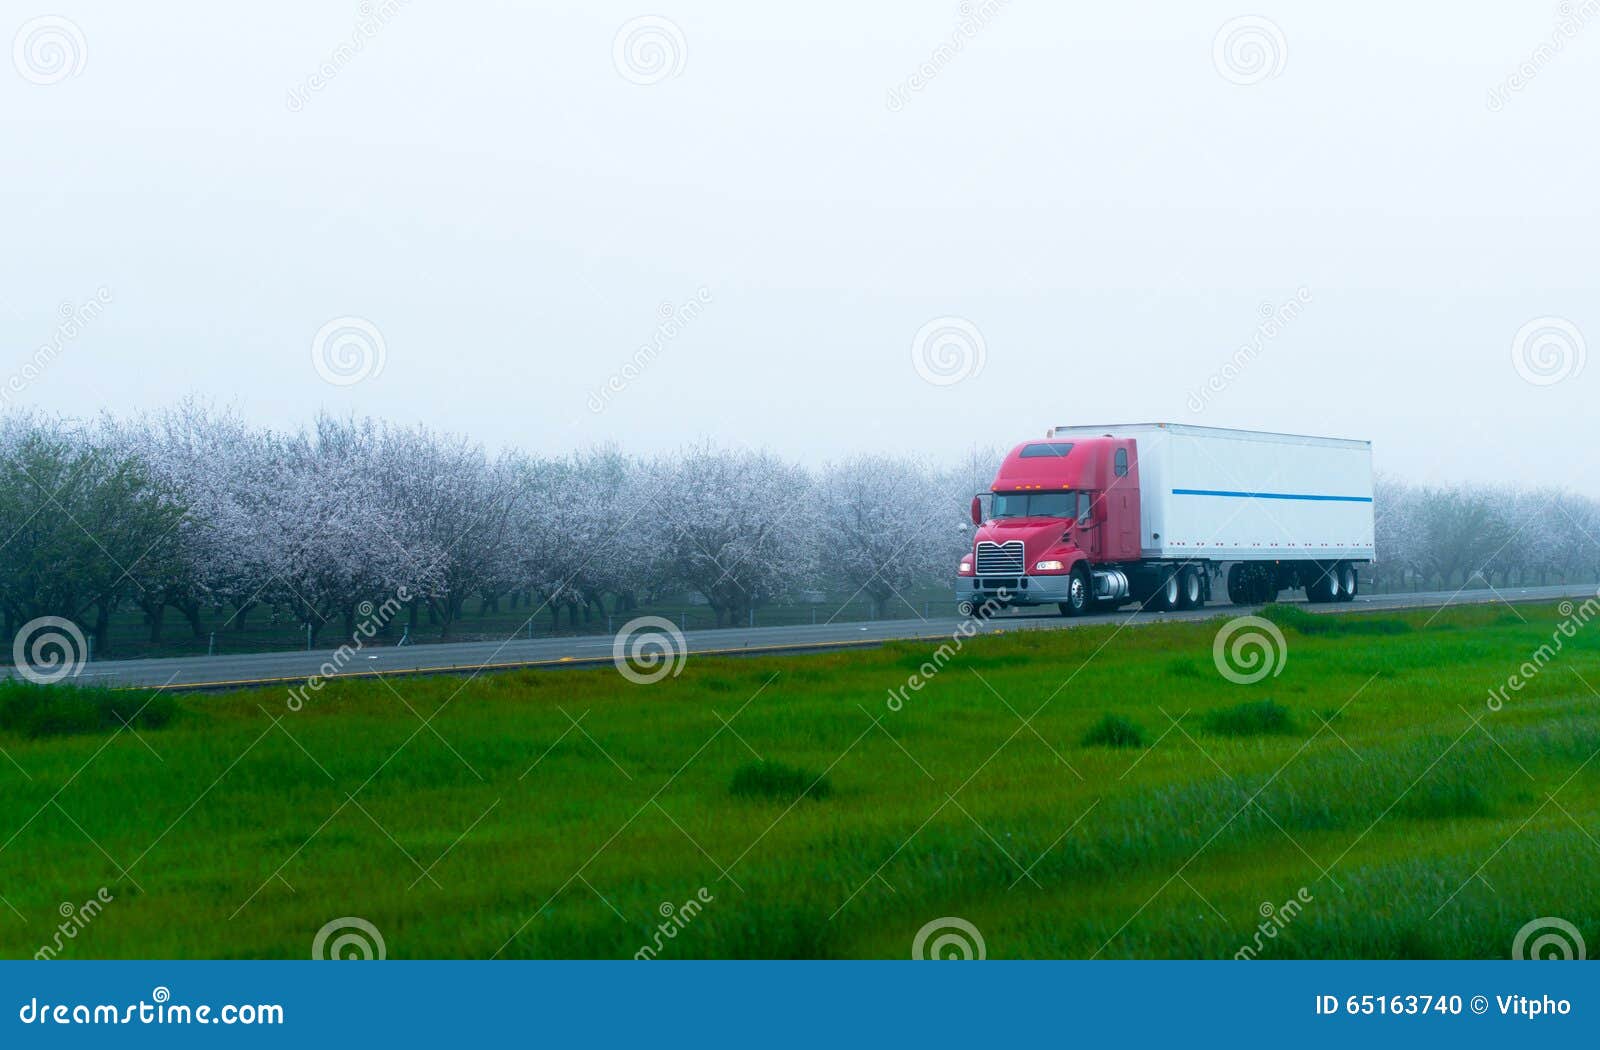 stylish semi truck and trailer on highway with blooming trees